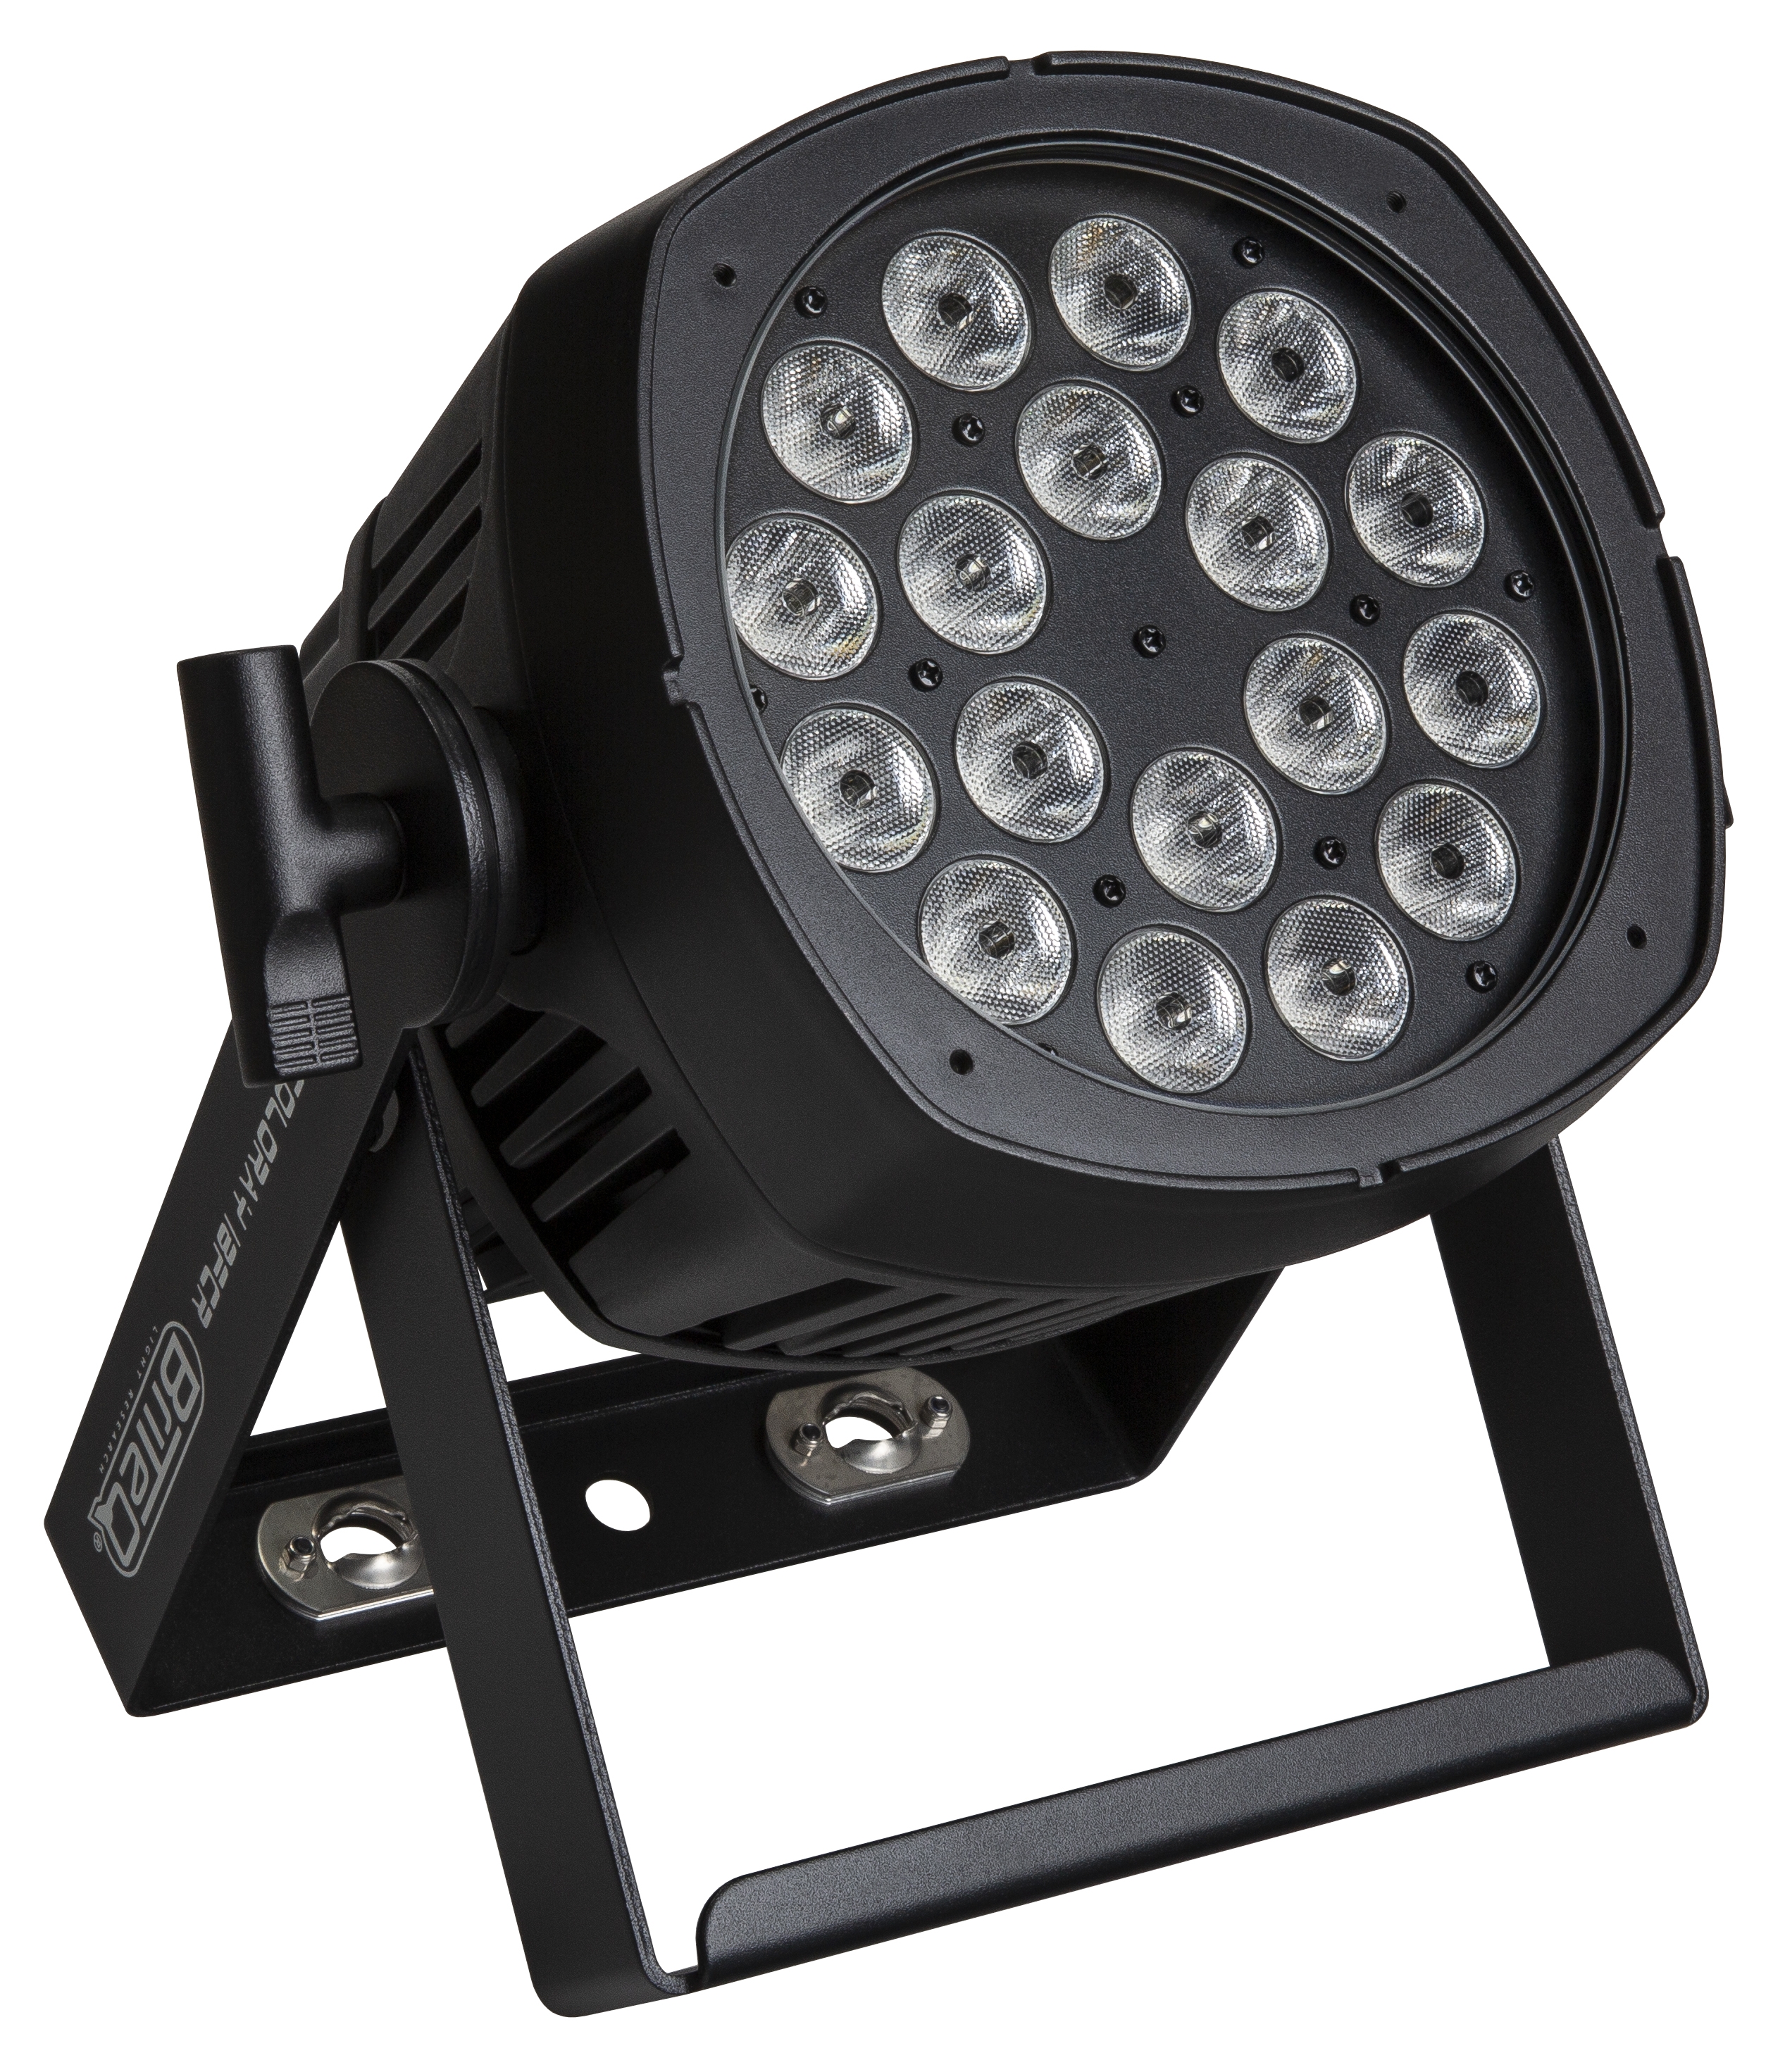 Outdoor projector with 18x8W RGBW leds, 20- beam angle and Neutrik TRUE1 Powercon and 3P XLR connectors and IP-fan cooling